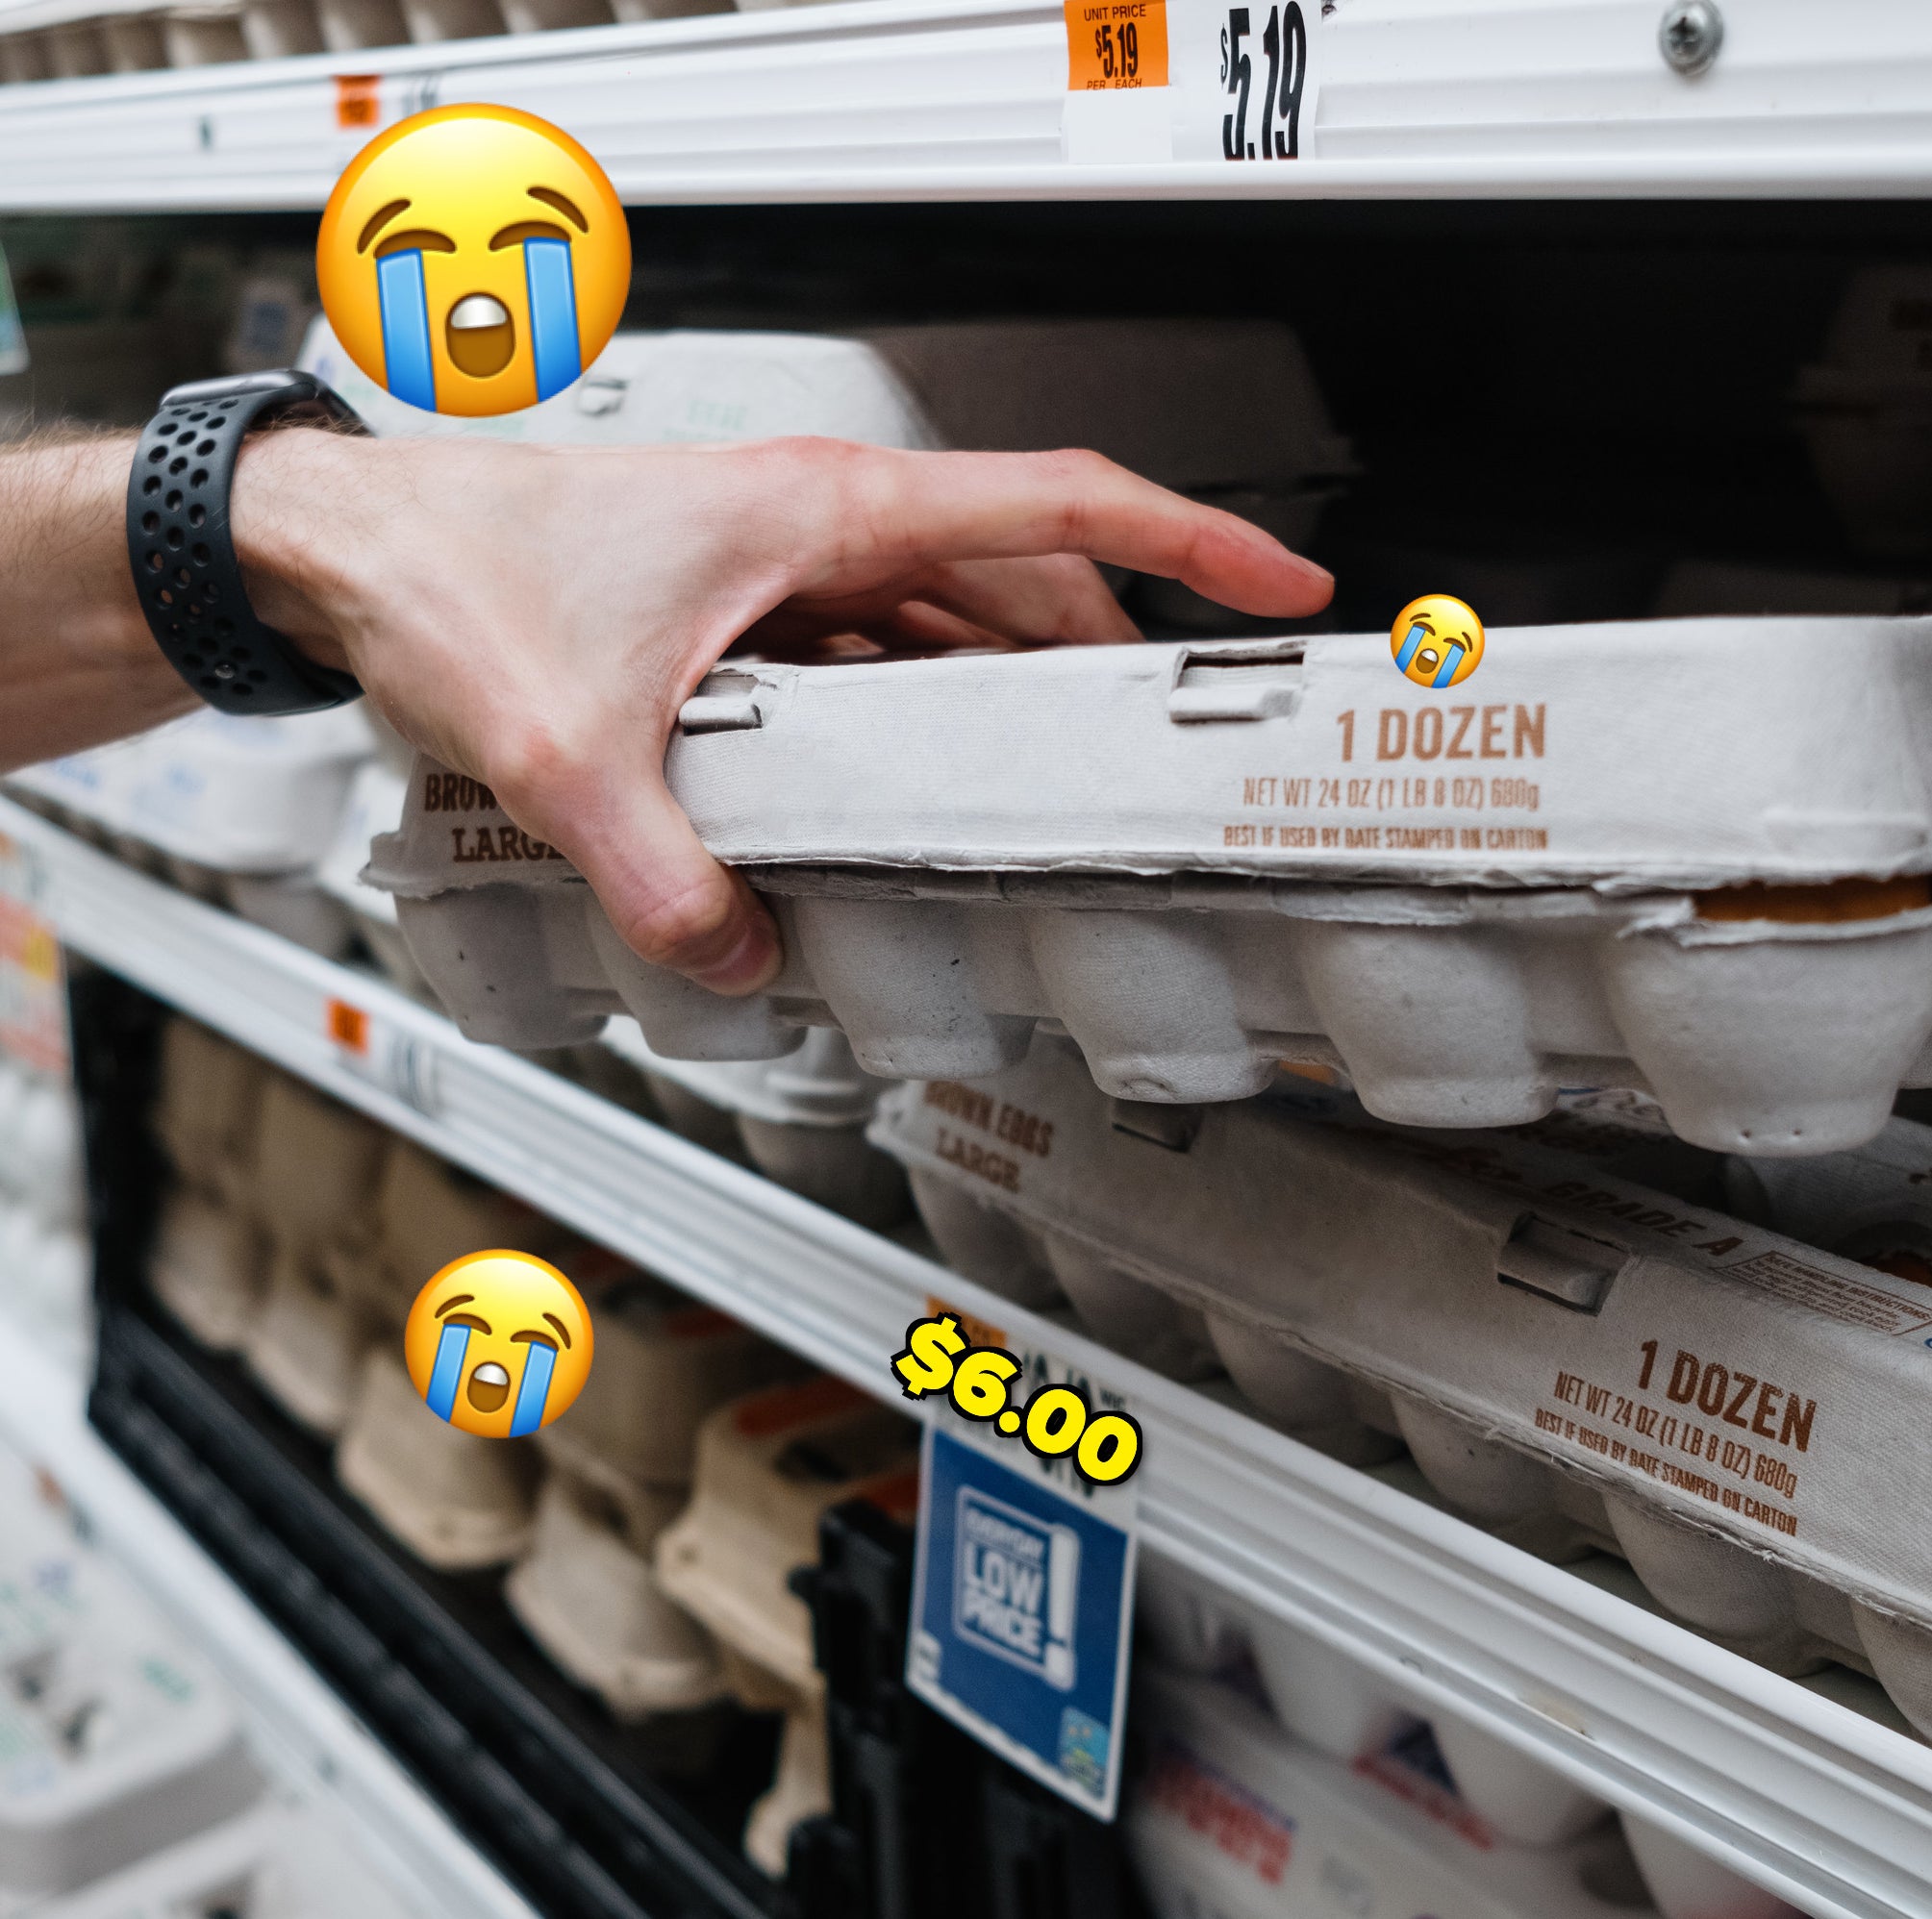 eggs that cost $6.00 a dozen getting pulled off the shelf with crying emojis everywhere